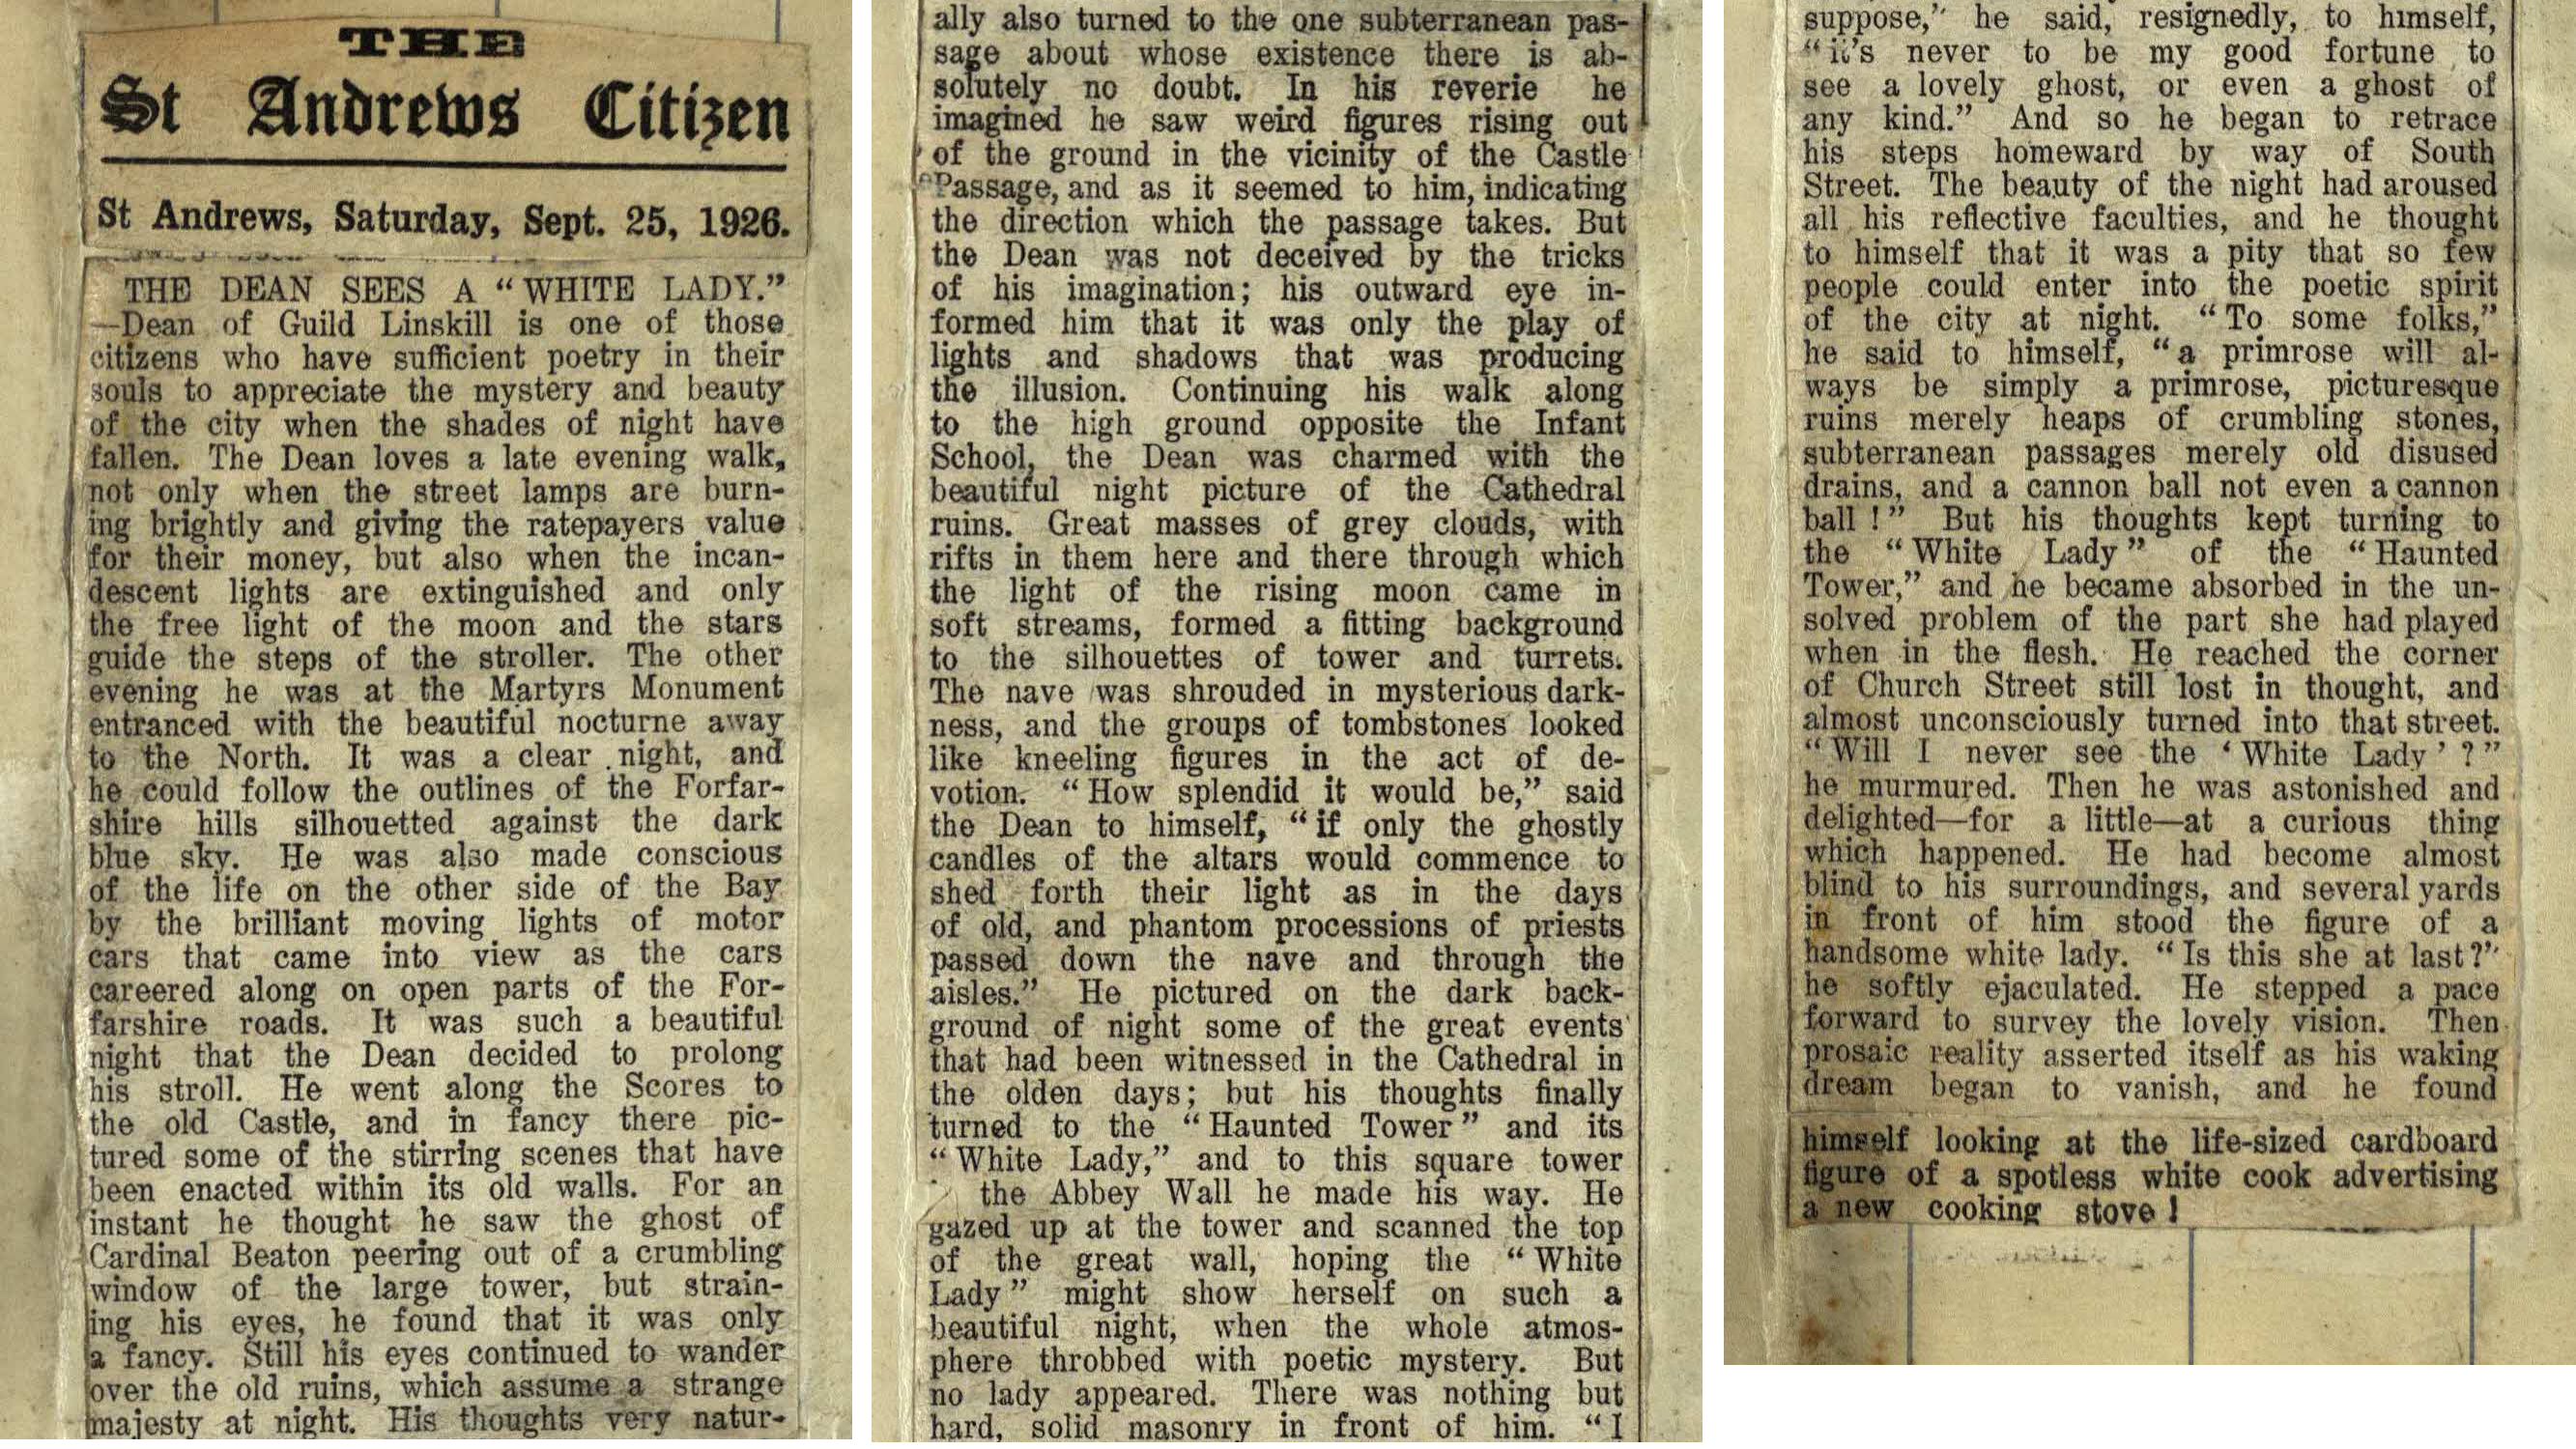 An account of Linksill's own Ghost Walk from the 25 September 1926 issue of the St Andrews Citizen